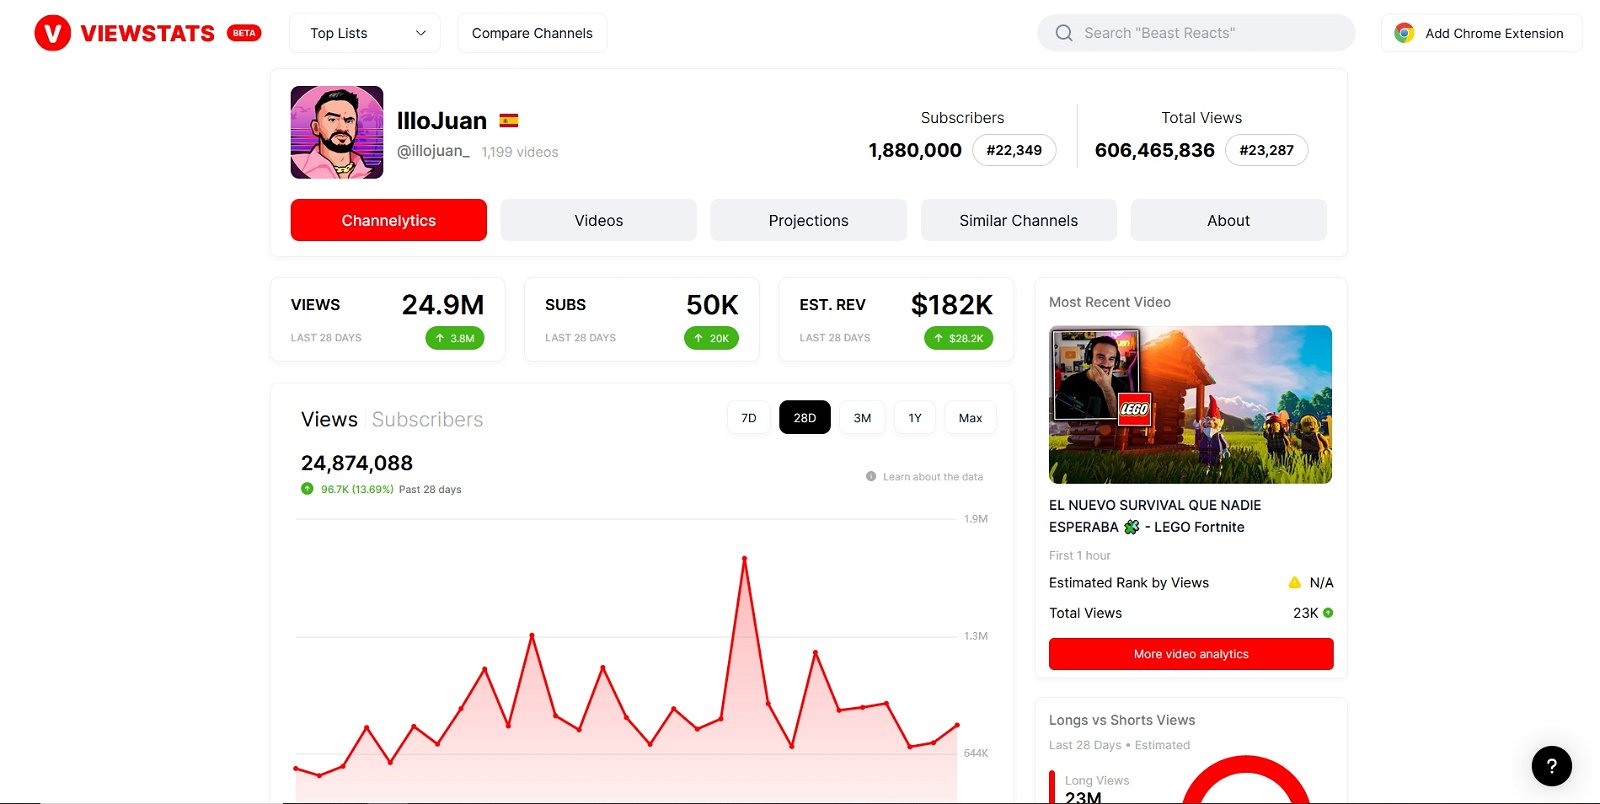 MrBeast, the largest YouTuber in the world, launches his own website to view statistics of any YouTube channel